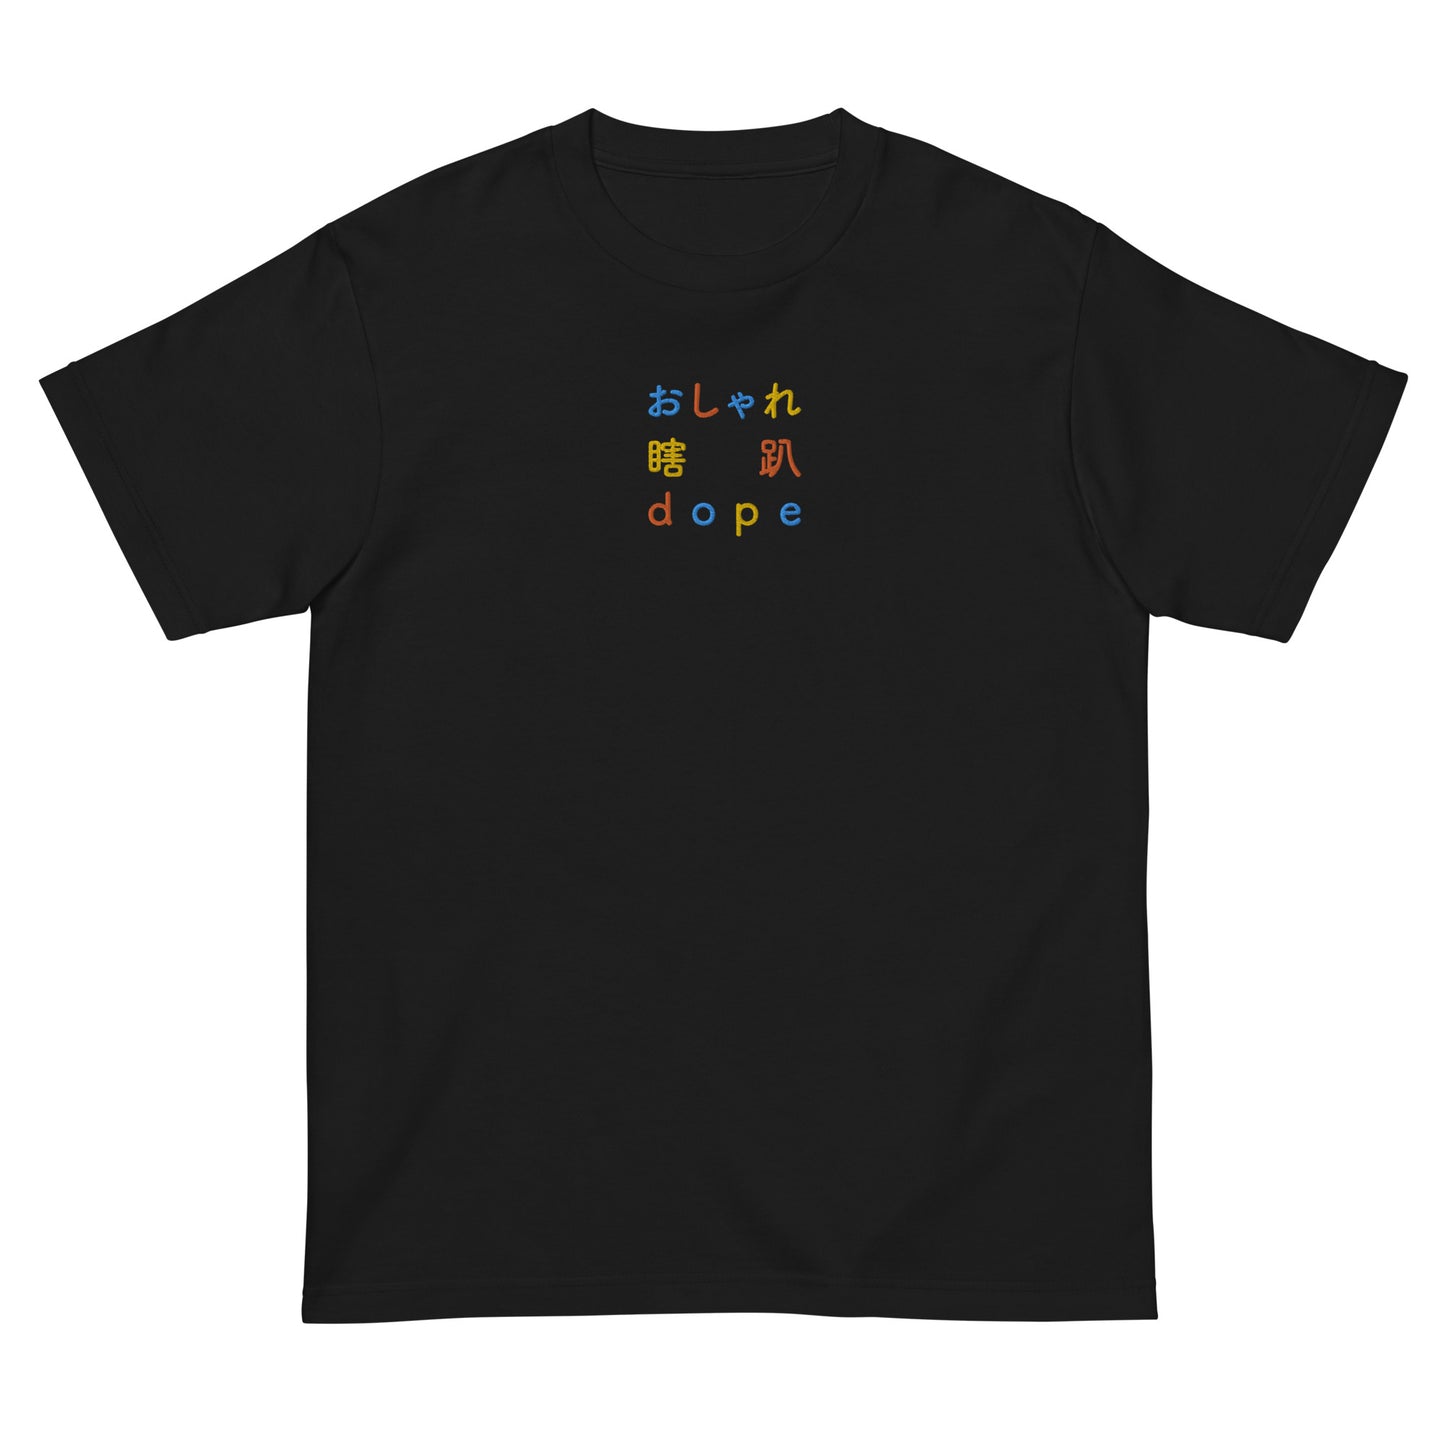 Black High Quality Tee - Front Design with an Blue, Orange, Yellow Embroidery "Dope" in Japanese,Chinese and English